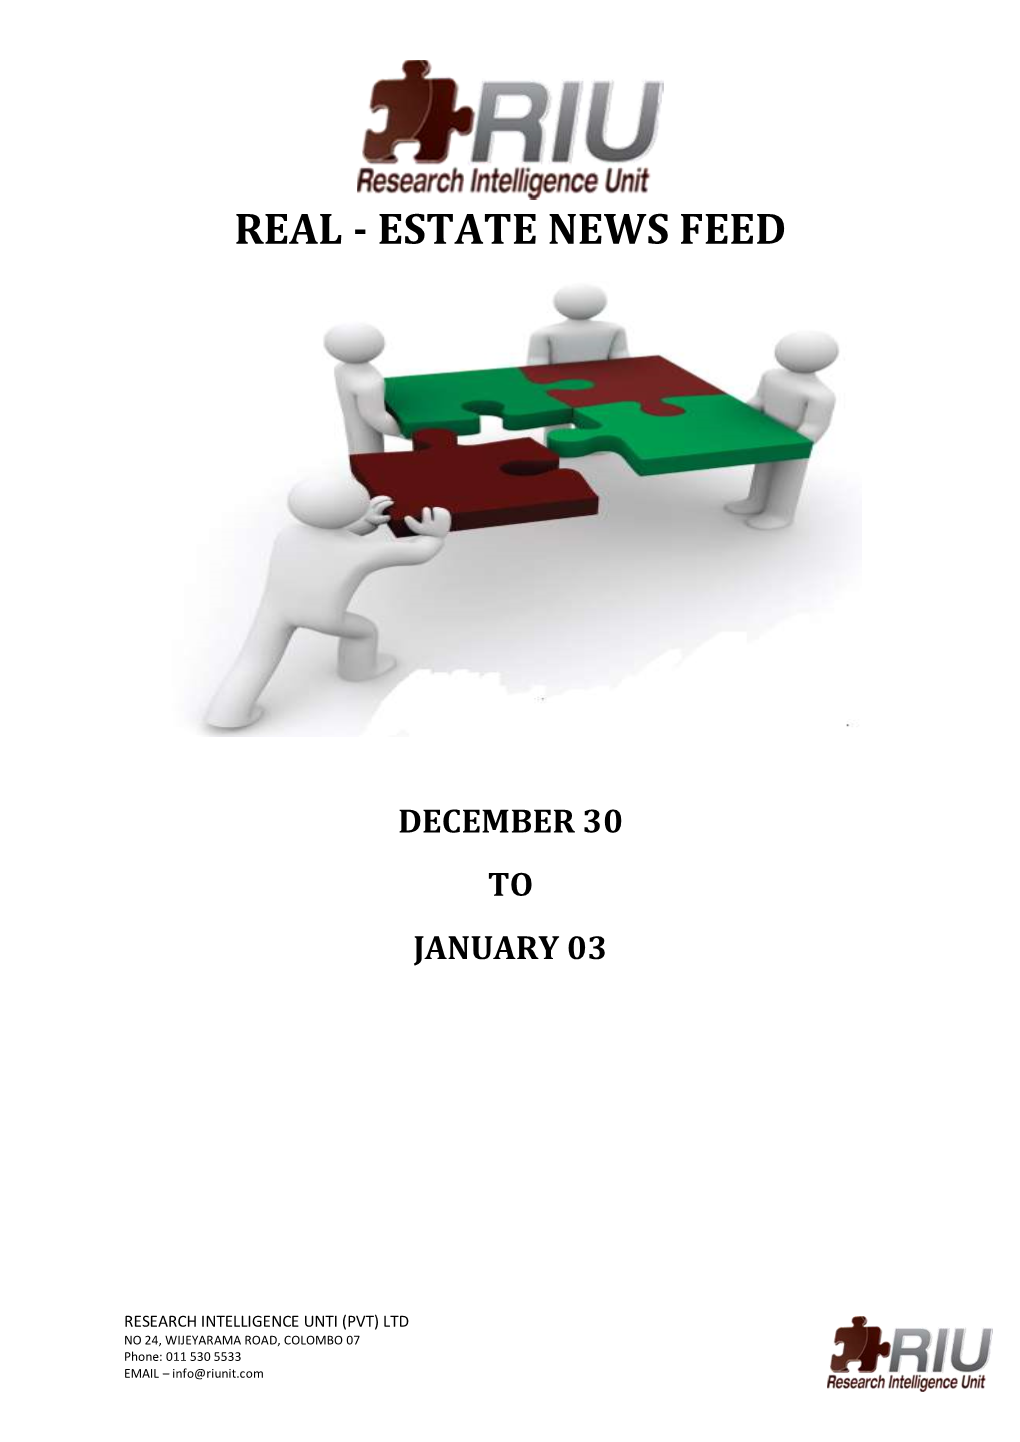 Real - Estate News Feed